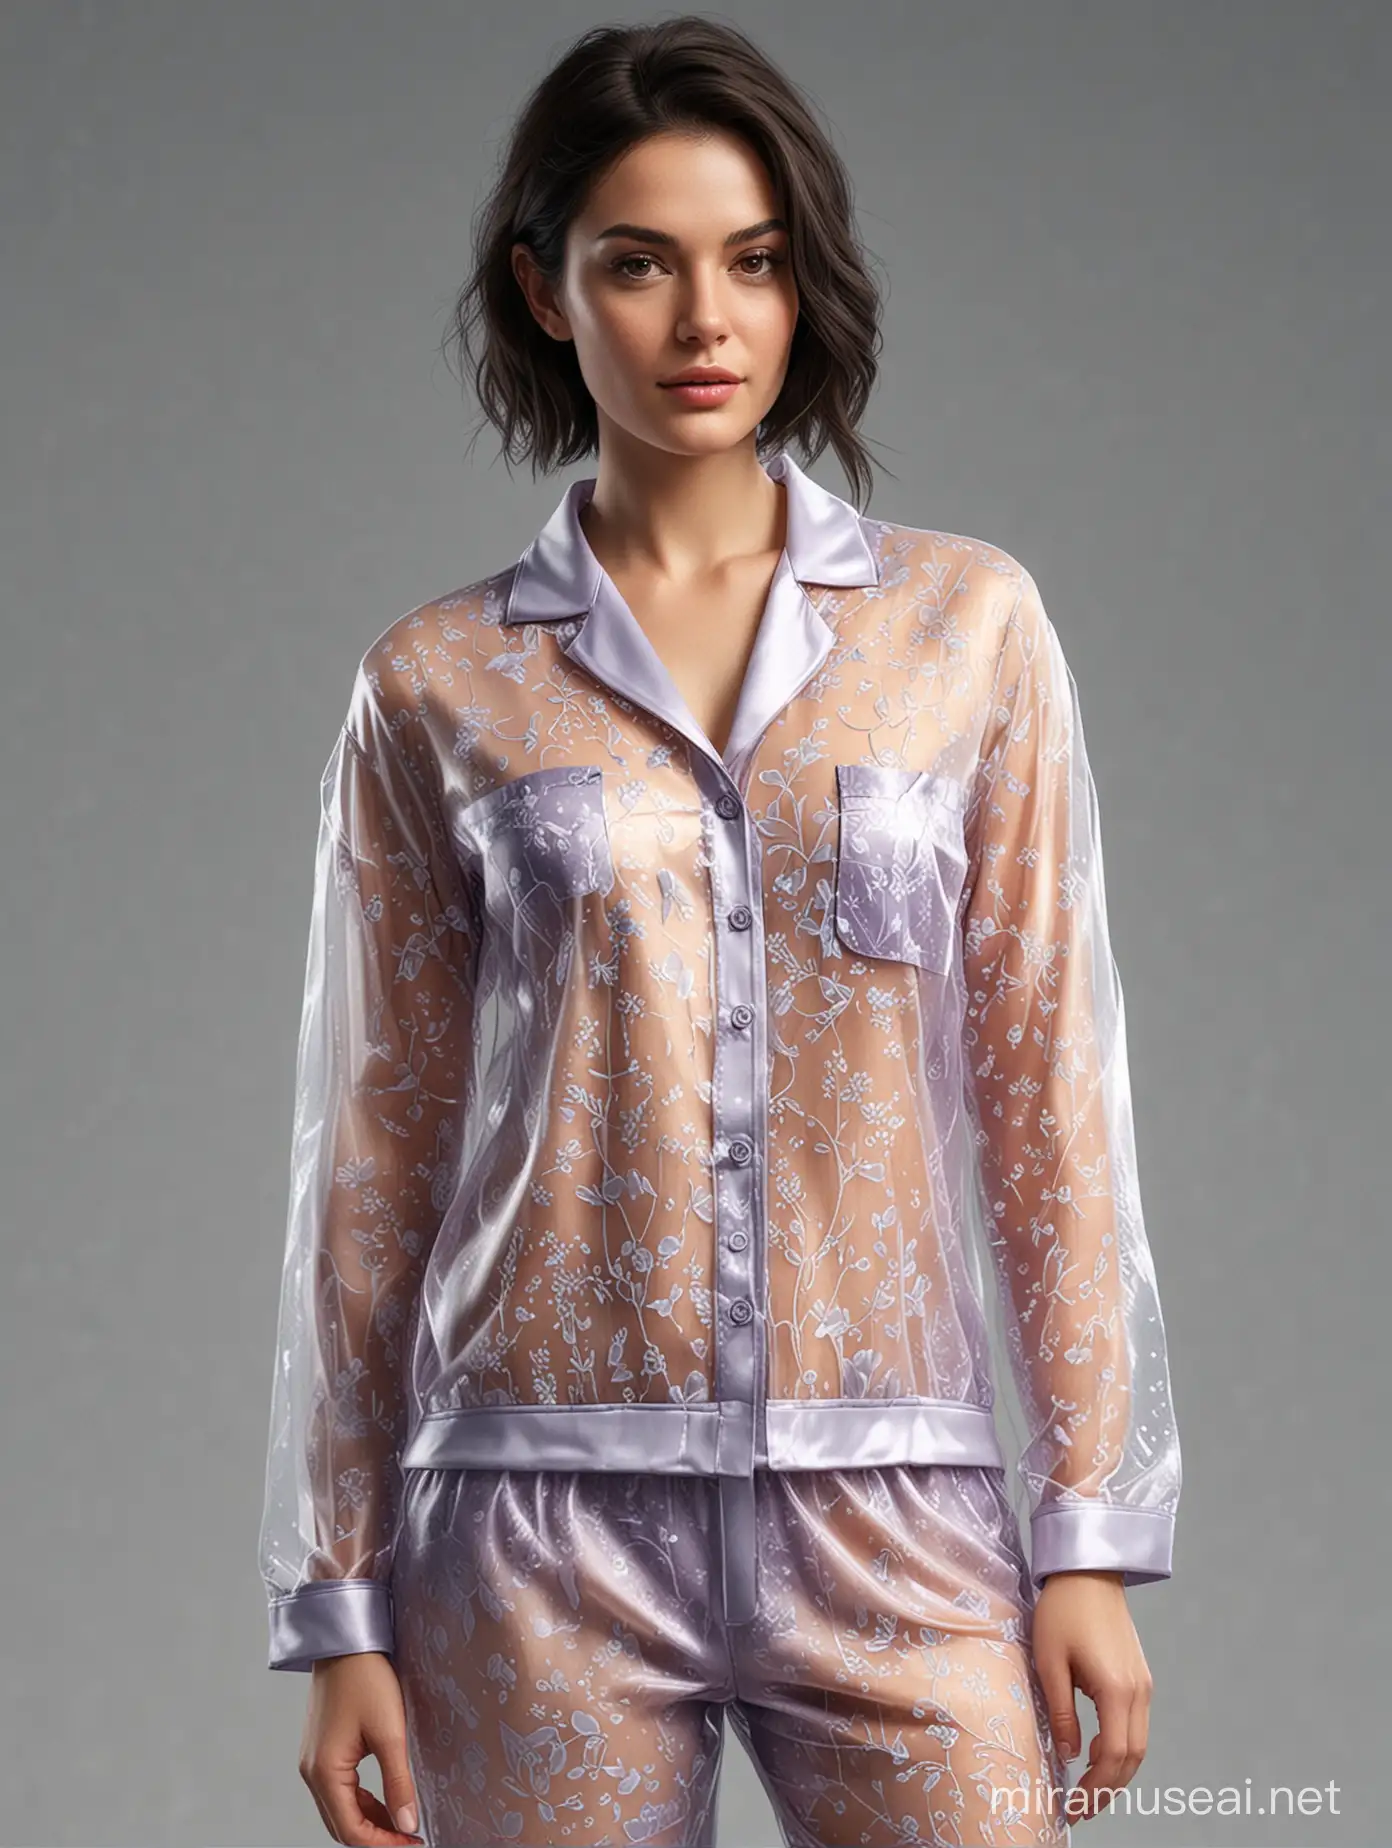 Create an image in a photorealistic style: a woman with dark hair in her modern, unusual outfit, which is transparent pajamas. This outfit should be highlighted with impressive details that show the complexity and sophistication of the transparent fabric, as well as providing a clear view of the texture in bright, vibrant shades.